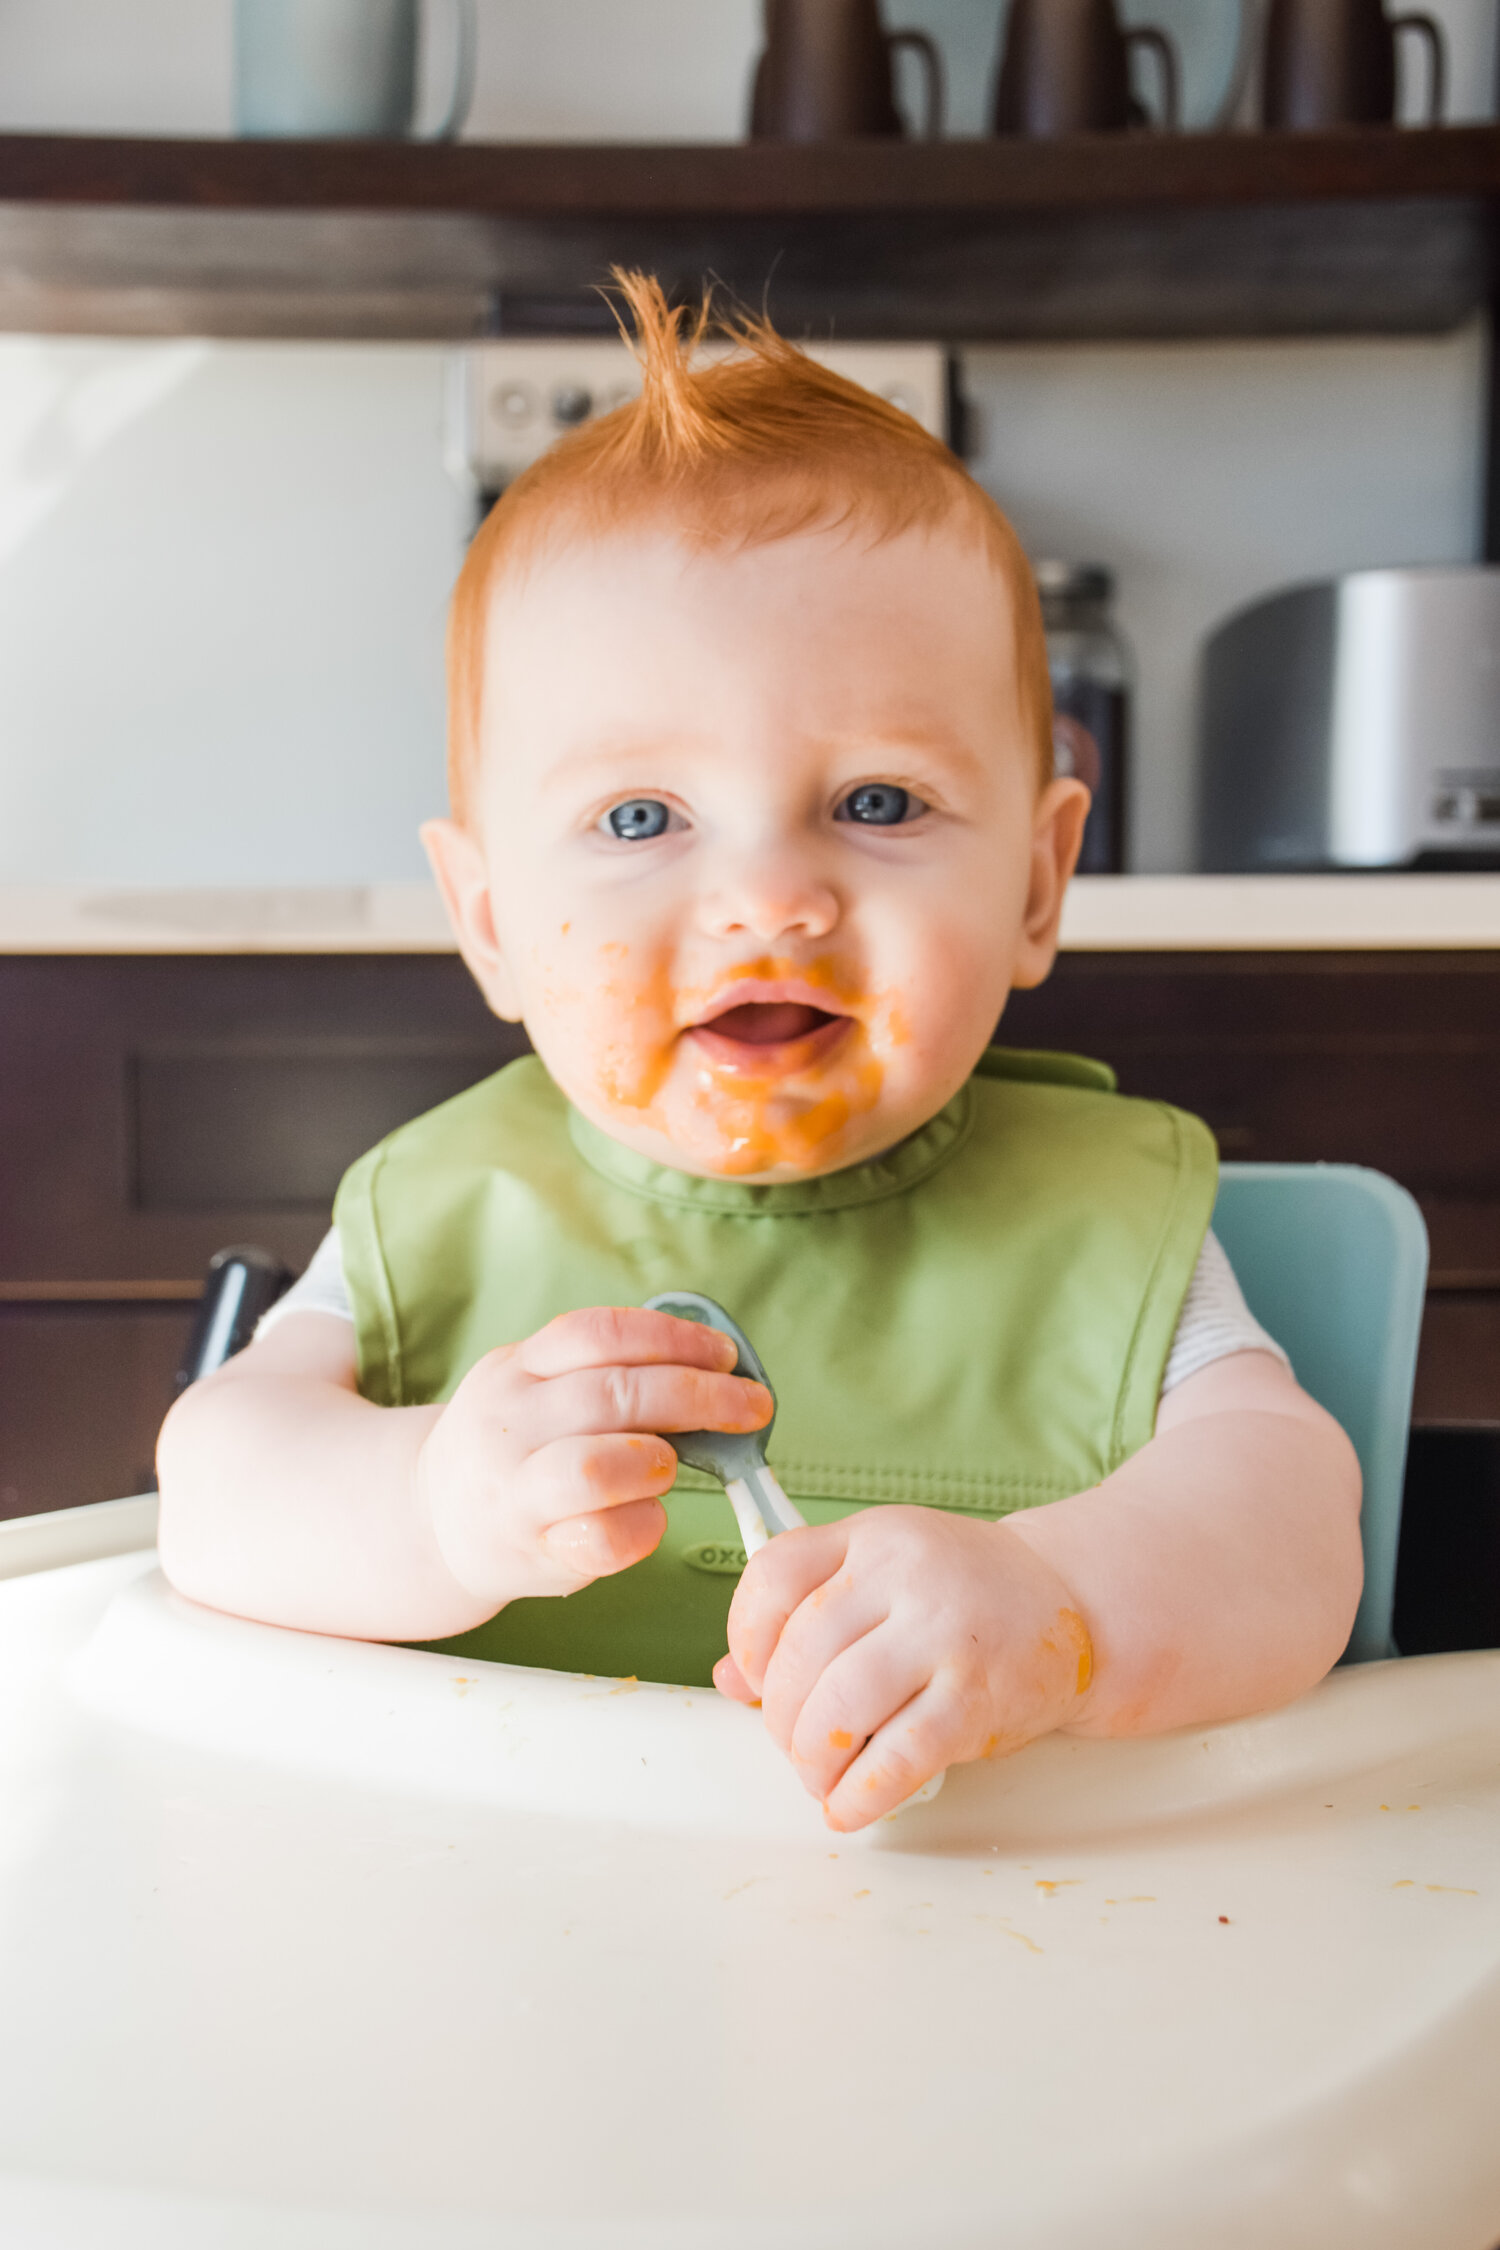 A Comprehensive Guide to the Best Baby Feeding Supplies